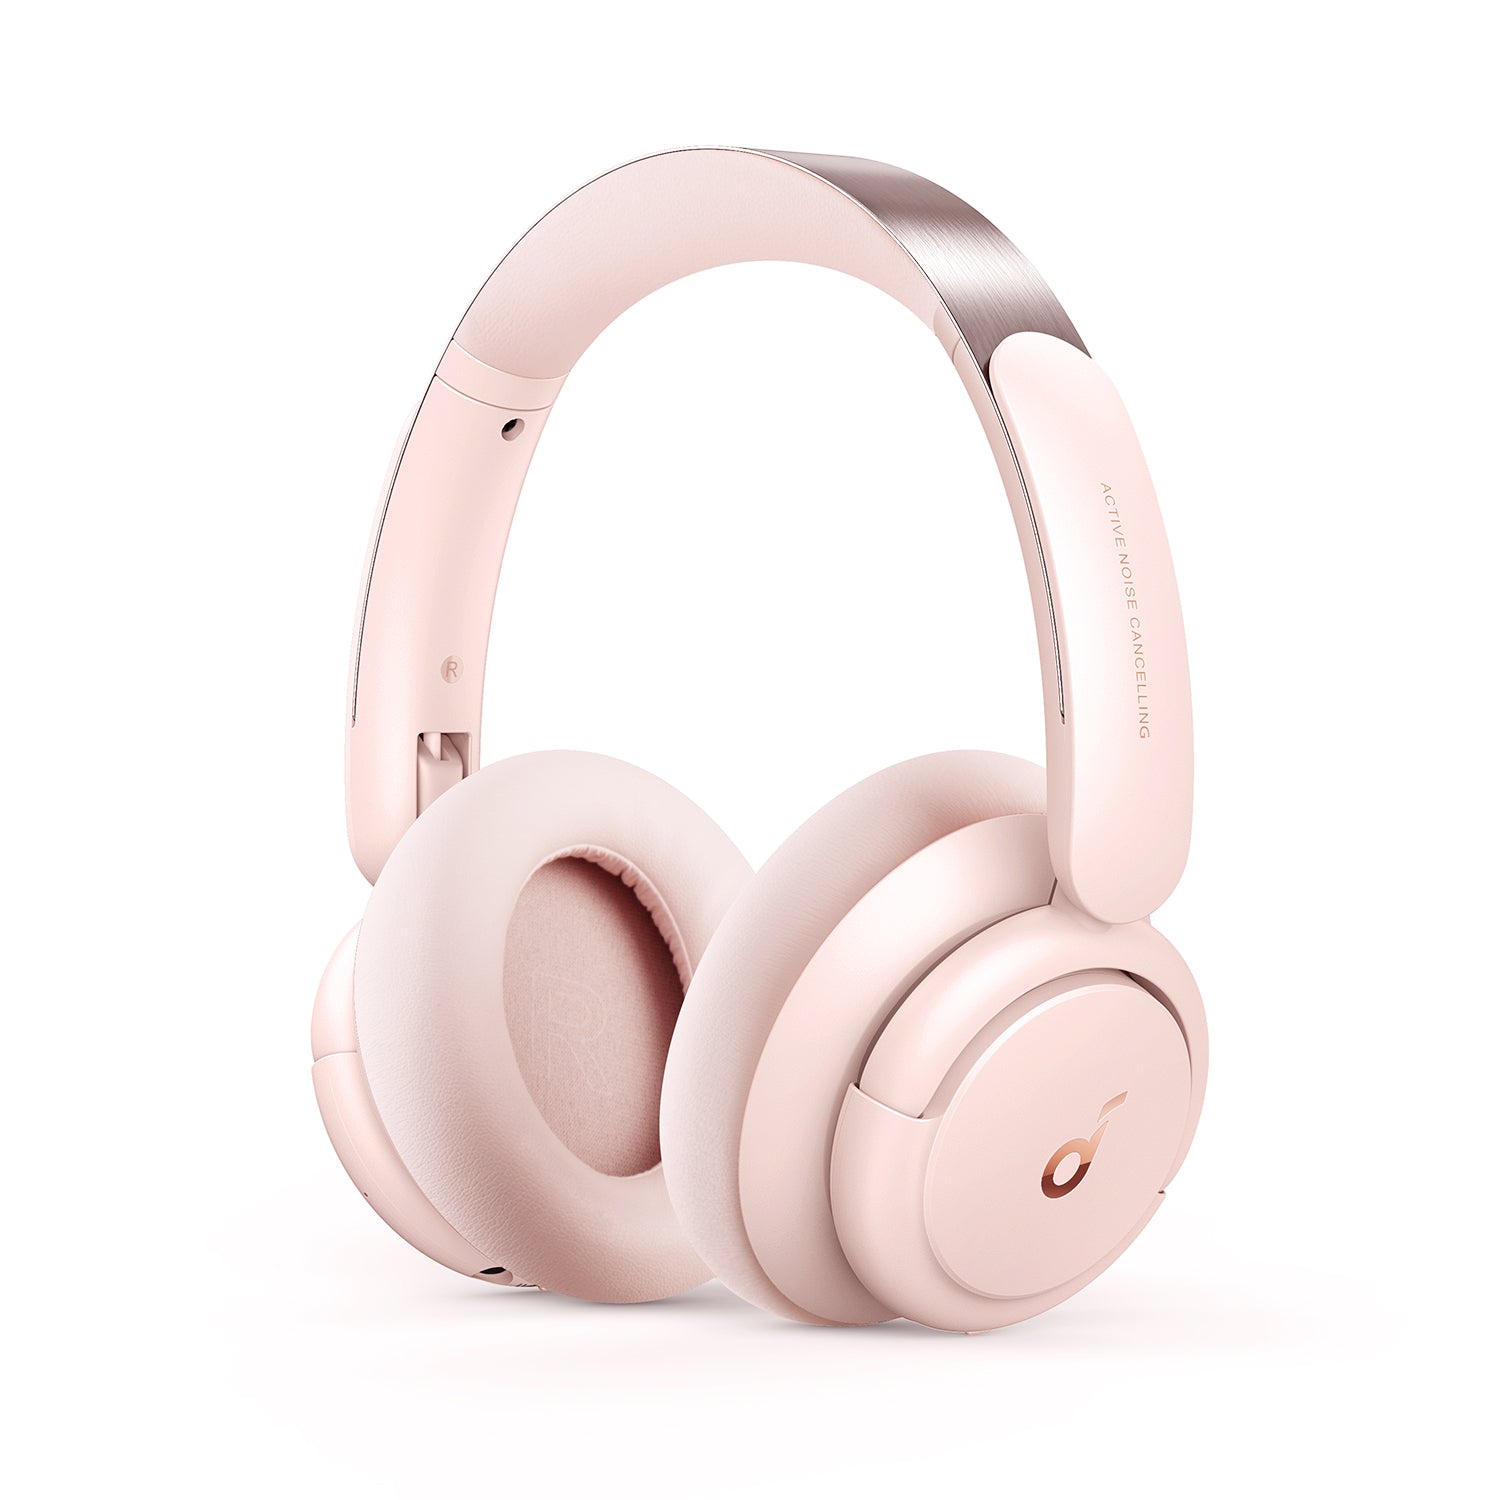 These Soundcore noise-cancelling headphones are on offer